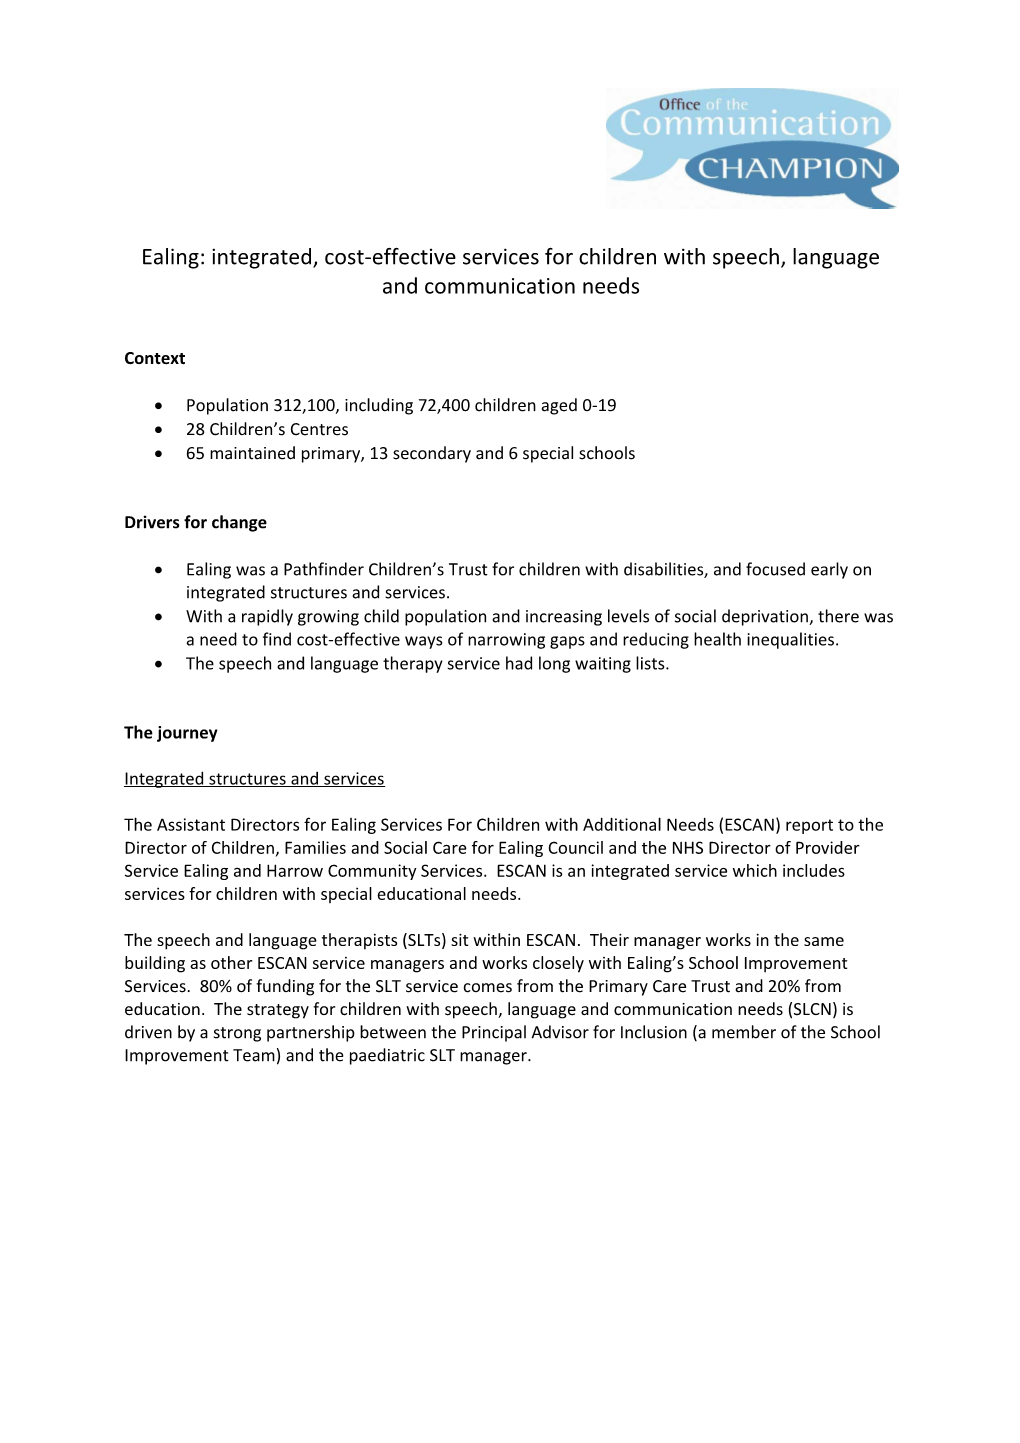 Ealing: Integrated, Cost-Effective Services for Children with Speech, Language and Communication